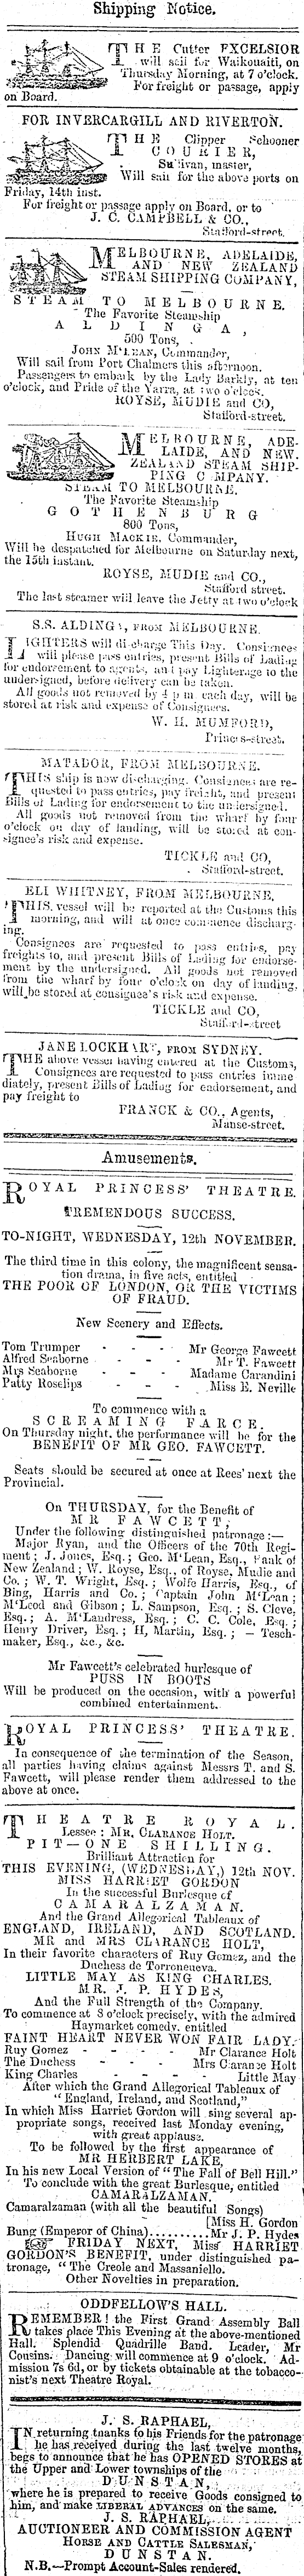 Papers Past Newspapers Otago Daily Times 12 November 1862 Page 3 Advertisements Column 4